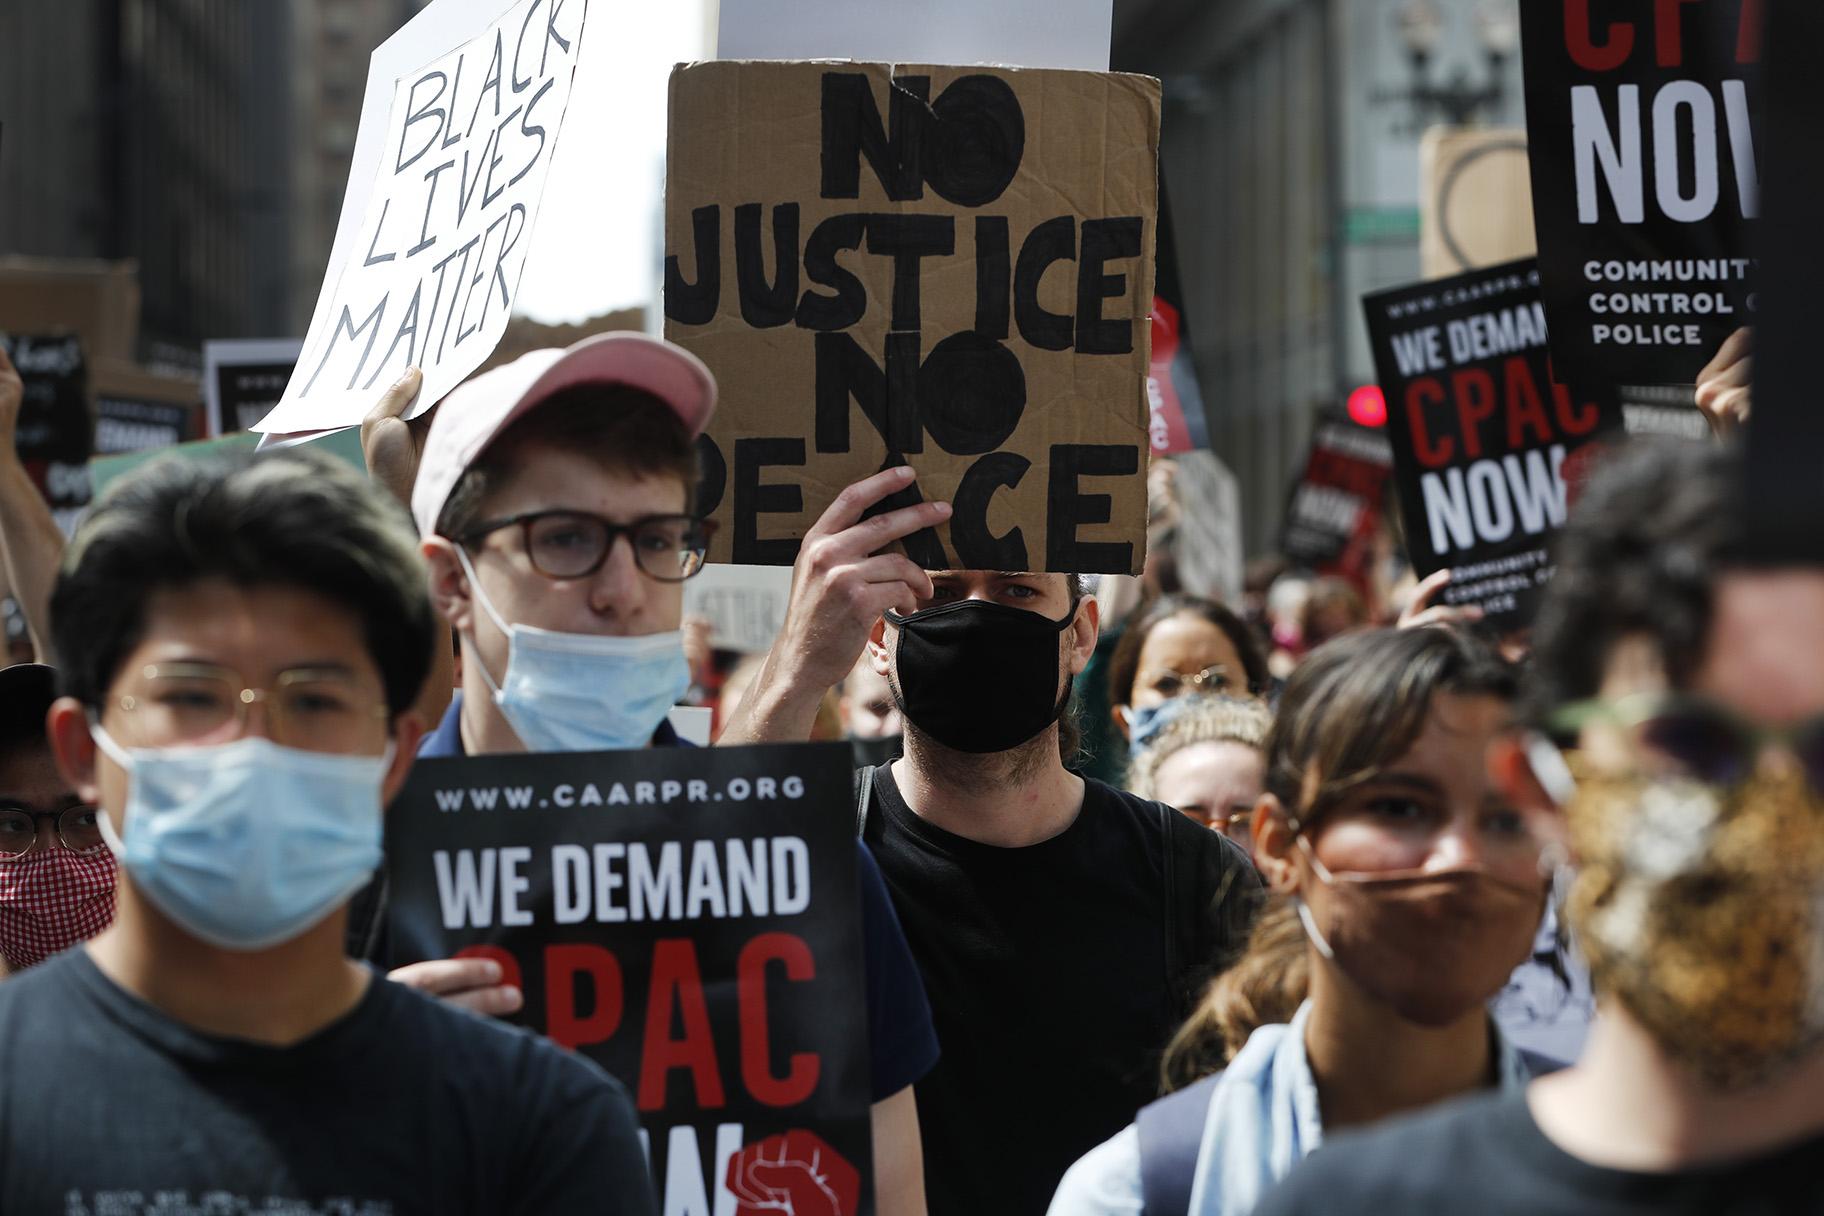 Protesters march around Chicago’s City Hall, Wednesday, June 17, 2020, demanding that Mayor Lori Lightfoot enact the ordinance for an all-elected Civilian Police Accountability Council, CPAC. (AP Photo / Charles Rex Arbogast)